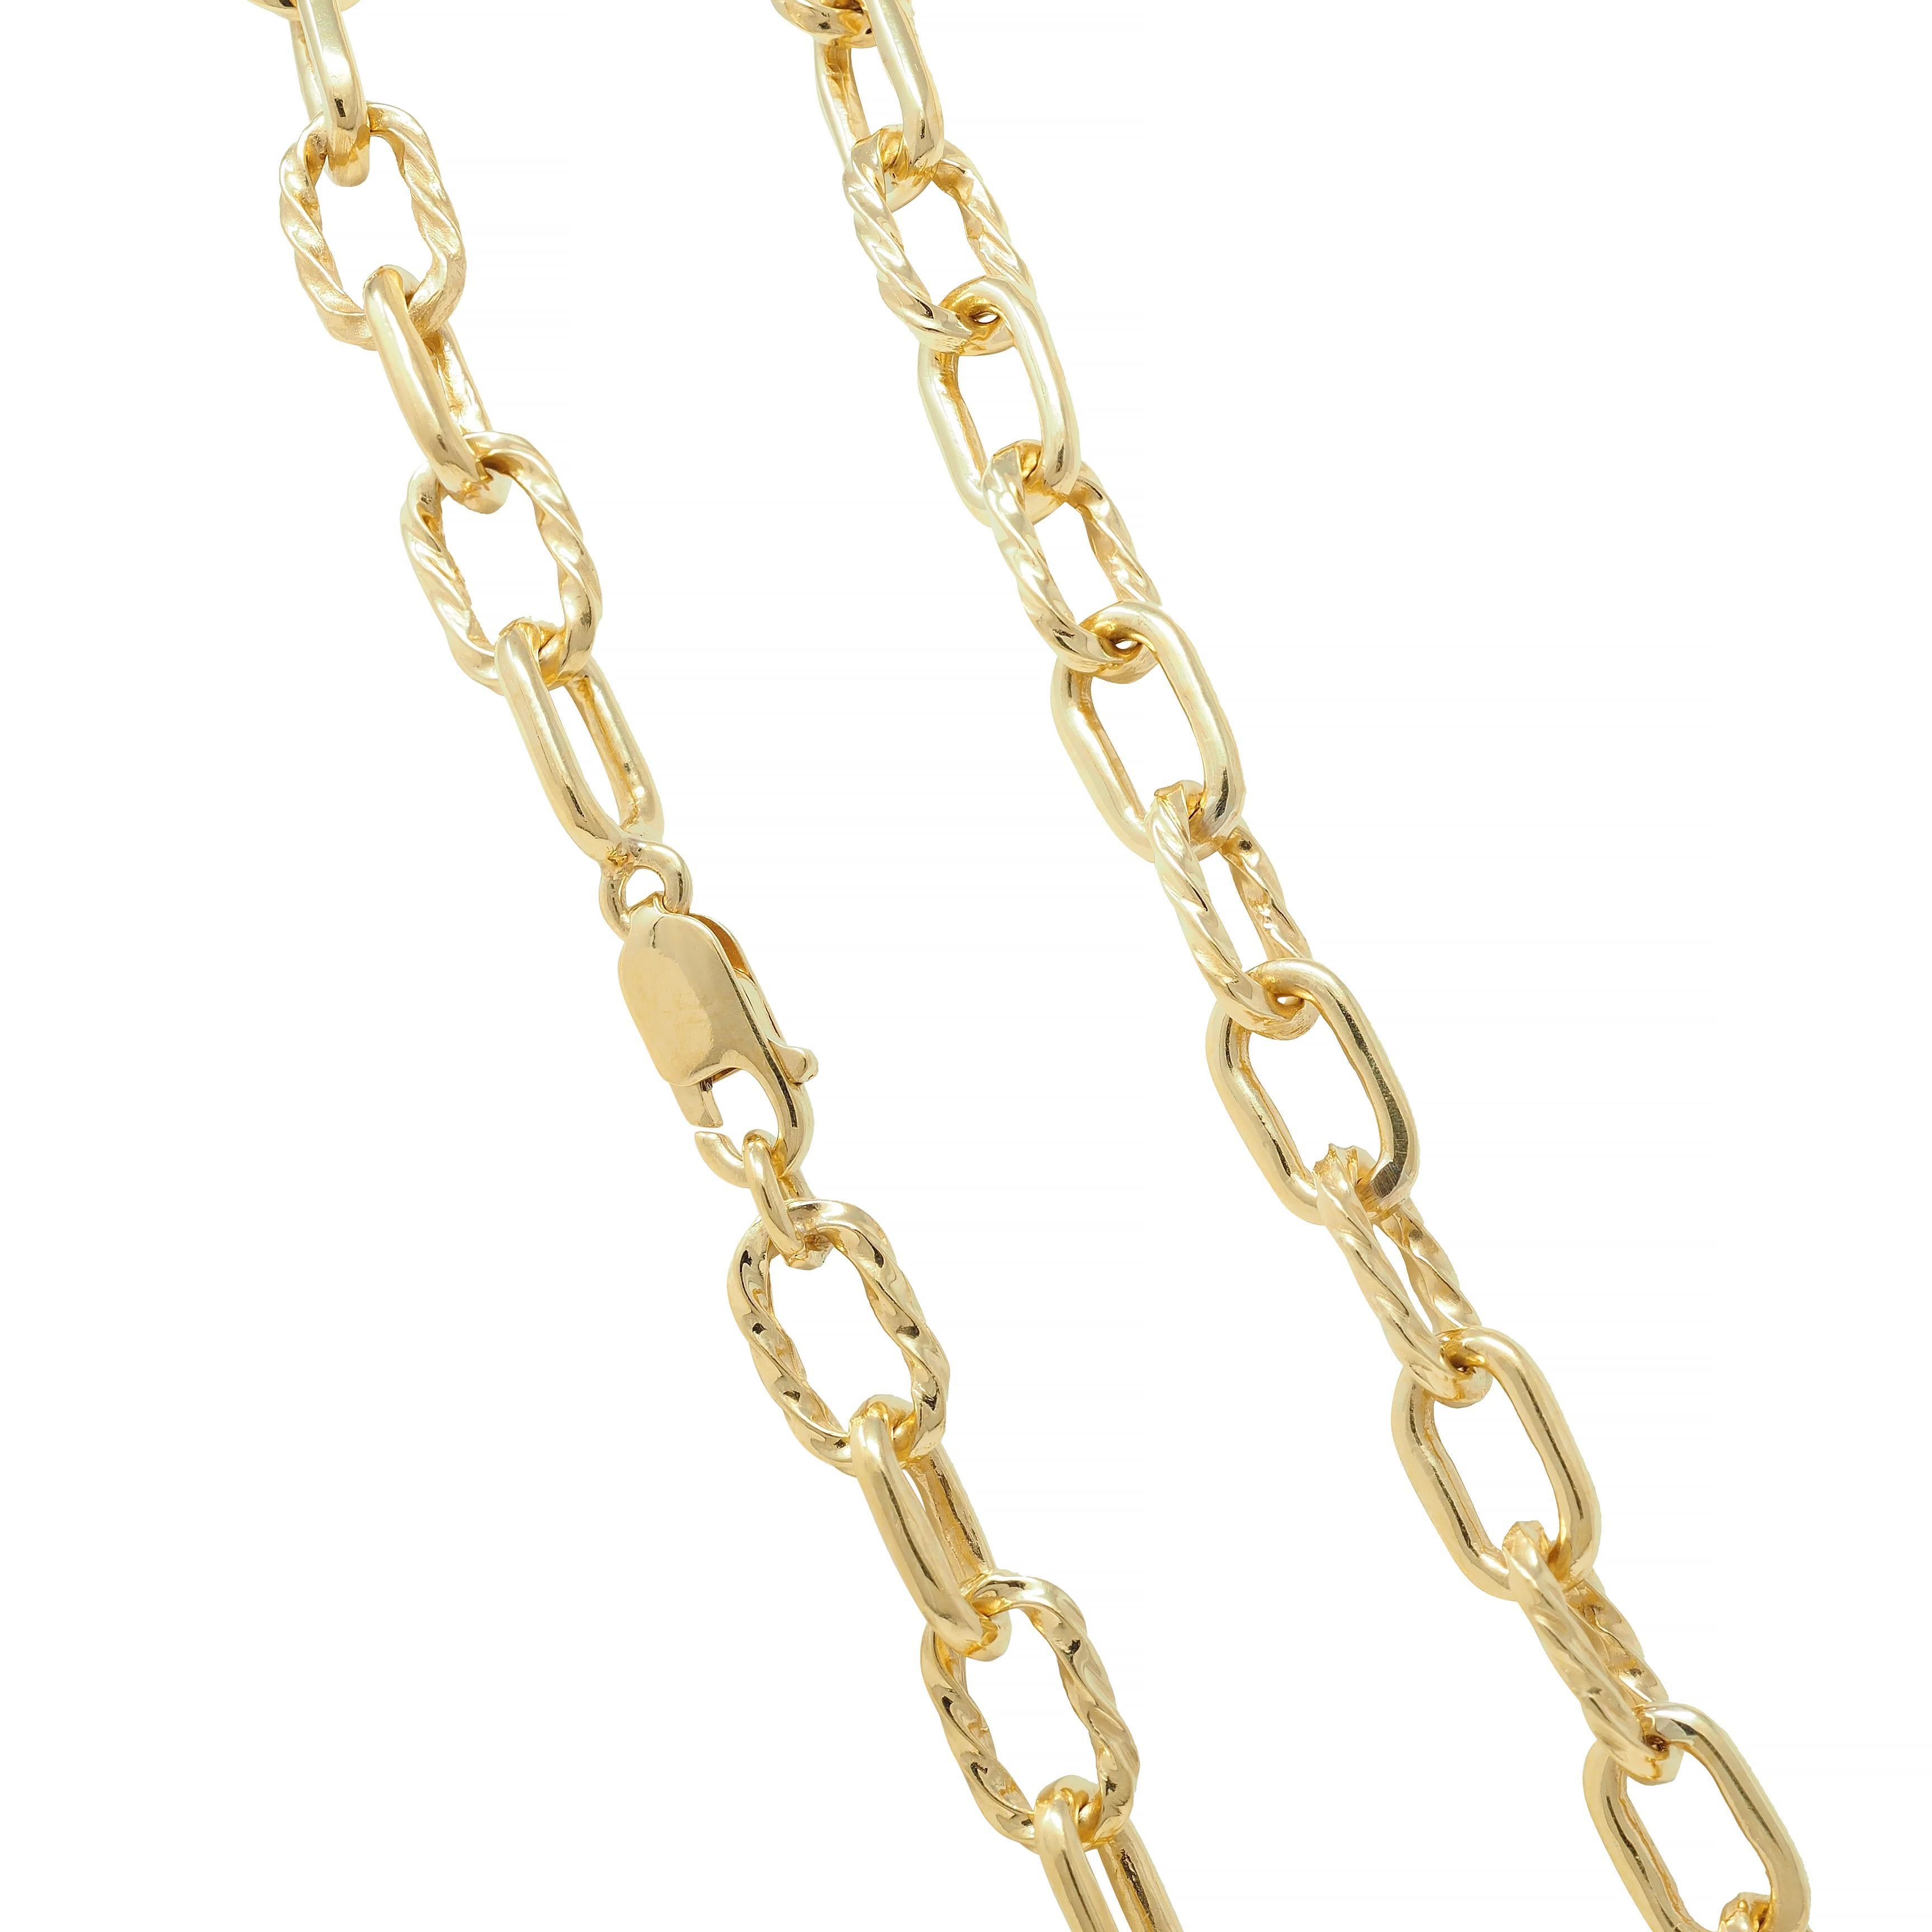 1960's 18 Karat Yellow Gold Twisted Cable Link Vintage Chain Necklace For Sale 4